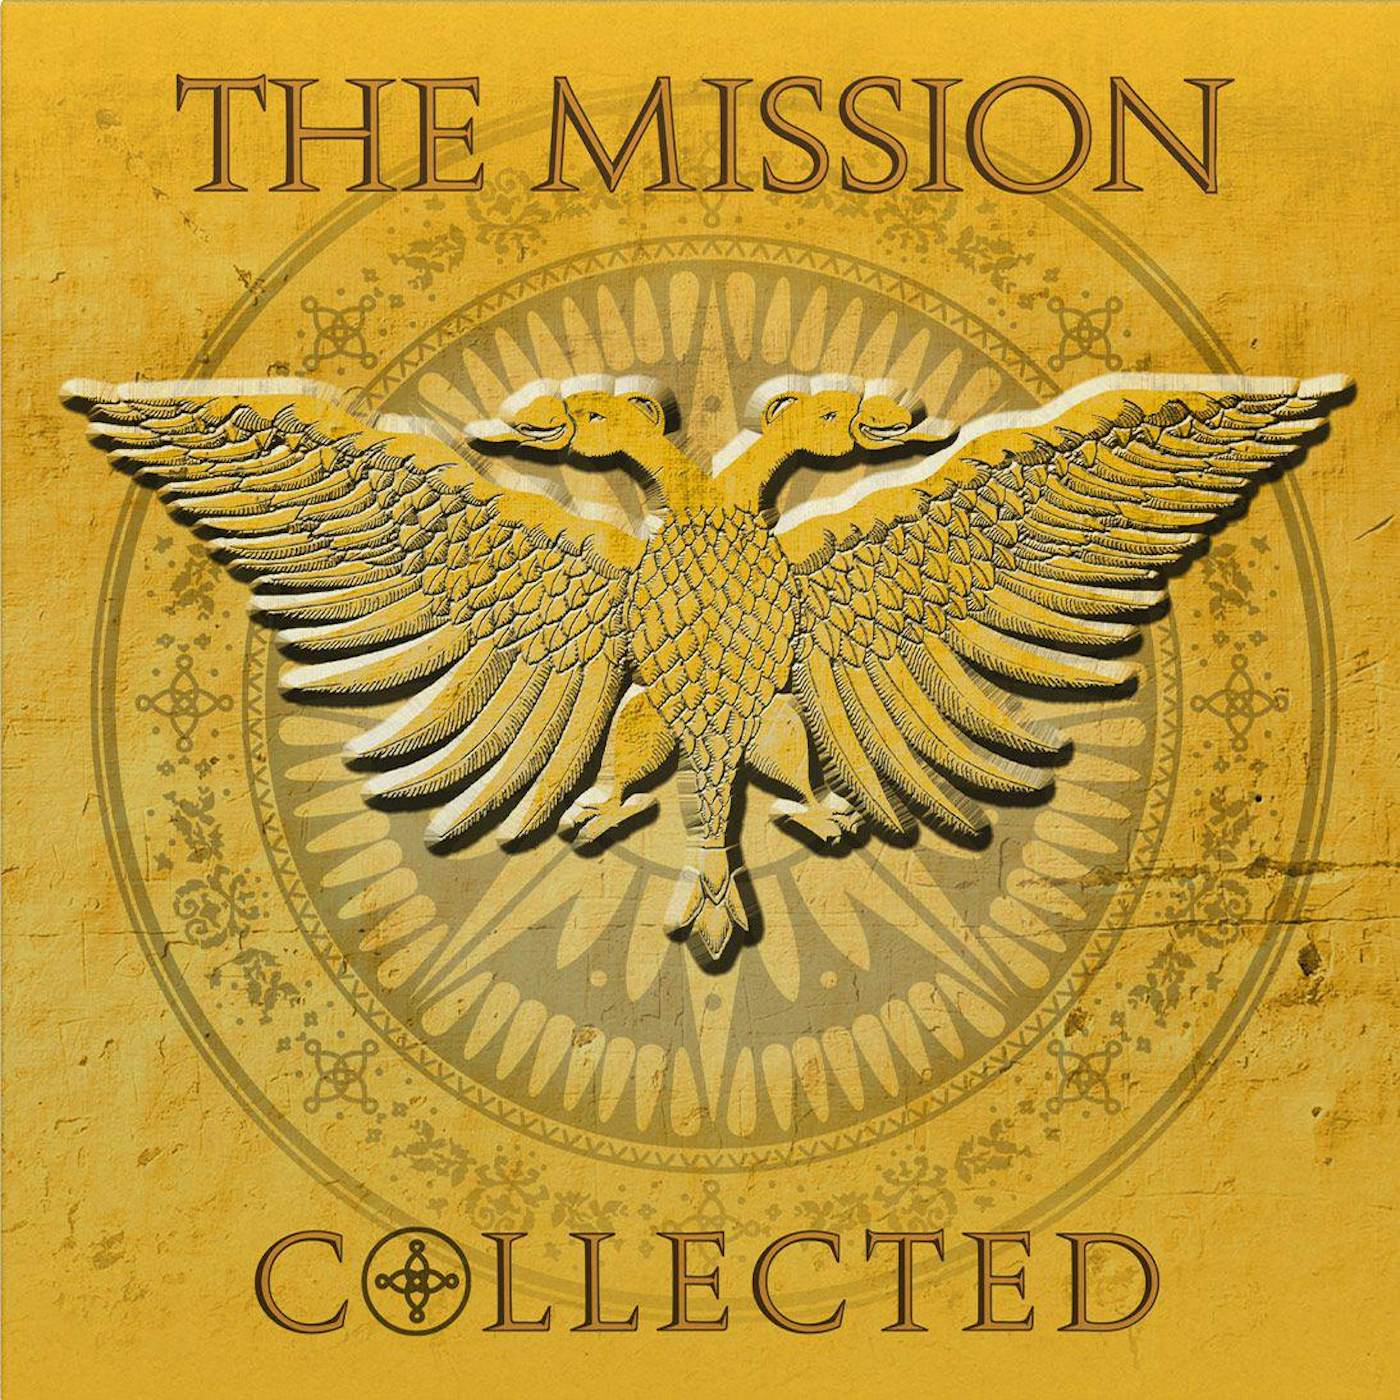 The Mission Collected (3LP/Box Set) Vinyl Record